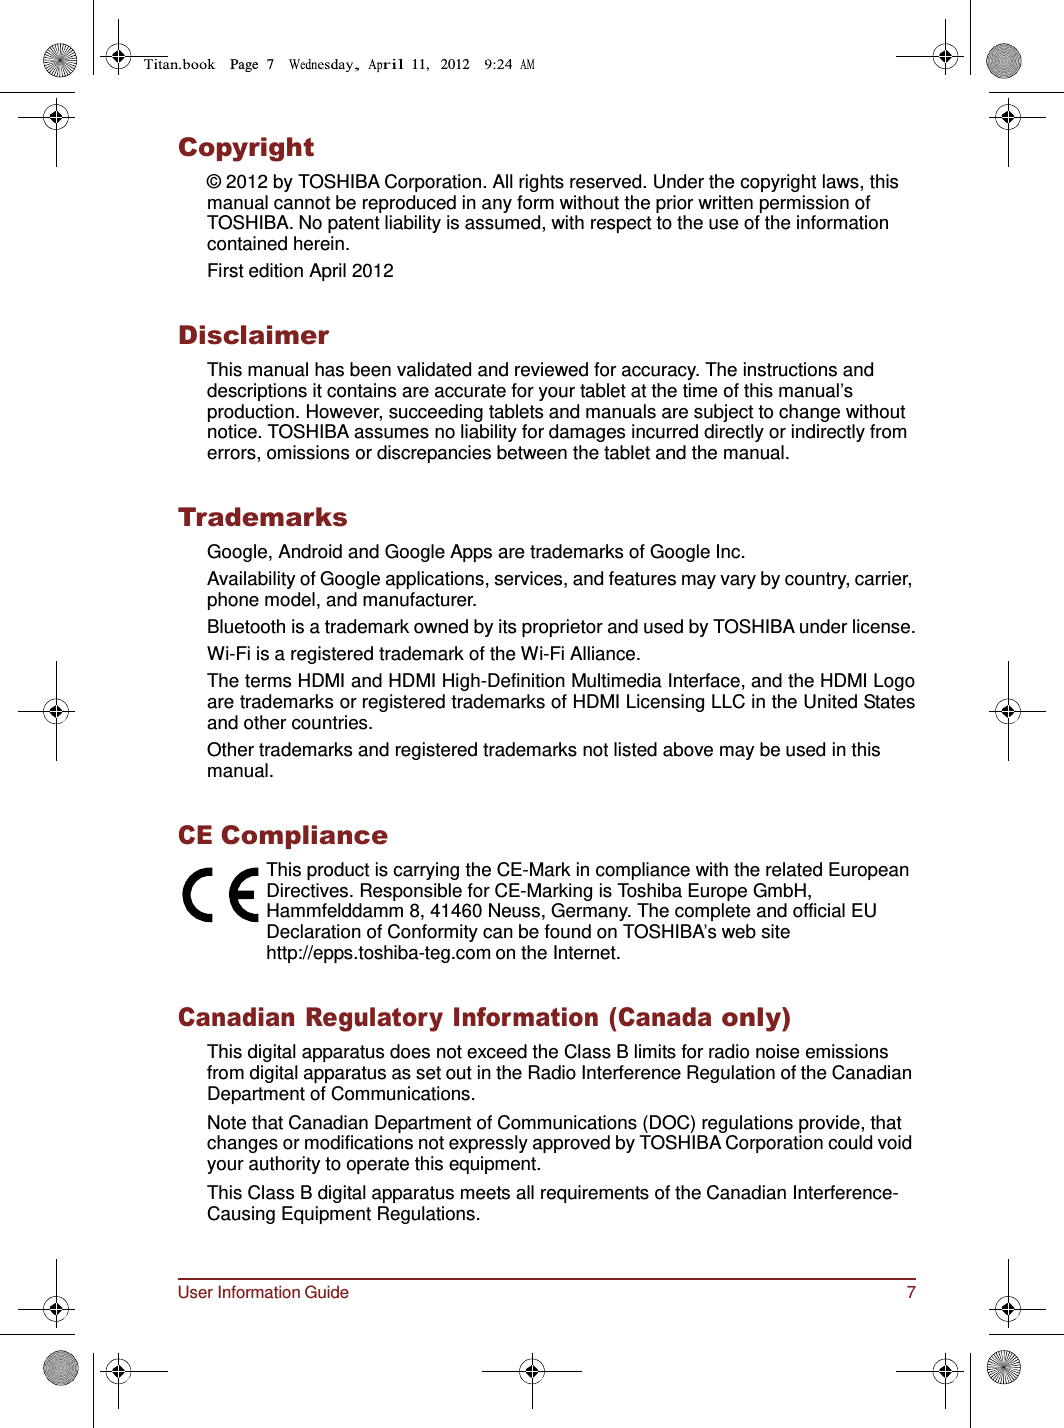 User Information Guide 7 Page  7        11,   2012          Copyright © 2012 by TOSHIBA Corporation. All rights reserved. Under the copyright laws, this manual cannot be reproduced in any form without the prior written permission of TOSHIBA. No patent liability is assumed, with respect to the use of the information contained herein. First edition April 2012   Disclaimer This manual has been validated and reviewed for accuracy. The instructions and descriptions it contains are accurate for your tablet at the time of this manual’s production. However, succeeding tablets and manuals are subject to change without notice. TOSHIBA assumes no liability for damages incurred directly or indirectly from errors, omissions or discrepancies between the tablet and the manual.   Trademarks Google, Android and Google Apps are trademarks of Google Inc. Availability of Google applications, services, and features may vary by country, carrier, phone model, and manufacturer. Bluetooth is a trademark owned by its proprietor and used by TOSHIBA under license. Wi-Fi is a registered trademark of the Wi-Fi Alliance. The terms HDMI and HDMI High-Definition Multimedia Interface, and the HDMI Logo are trademarks or registered trademarks of HDMI Licensing LLC in the United States and other countries. Other trademarks and registered trademarks not listed above may be used in this manual.   CE Compliance This product is carrying the CE-Mark in compliance with the related European Directives. Responsible for CE-Marking is Toshiba Europe GmbH, Hammfelddamm 8, 41460 Neuss, Germany. The complete and official EU Declaration of Conformity can be found on TOSHIBA’s web site http://epps.toshiba-teg.com on the Internet.   Canadian Regulatory Information (Canada only) This digital apparatus does not exceed the Class B limits for radio noise emissions from digital apparatus as set out in the Radio Interference Regulation of the Canadian Department of Communications. Note that Canadian Department of Communications (DOC) regulations provide, that changes or modifications not expressly approved by TOSHIBA Corporation could void your authority to operate this equipment. This Class B digital apparatus meets all requirements of the Canadian Interference- Causing Equipment Regulations. 